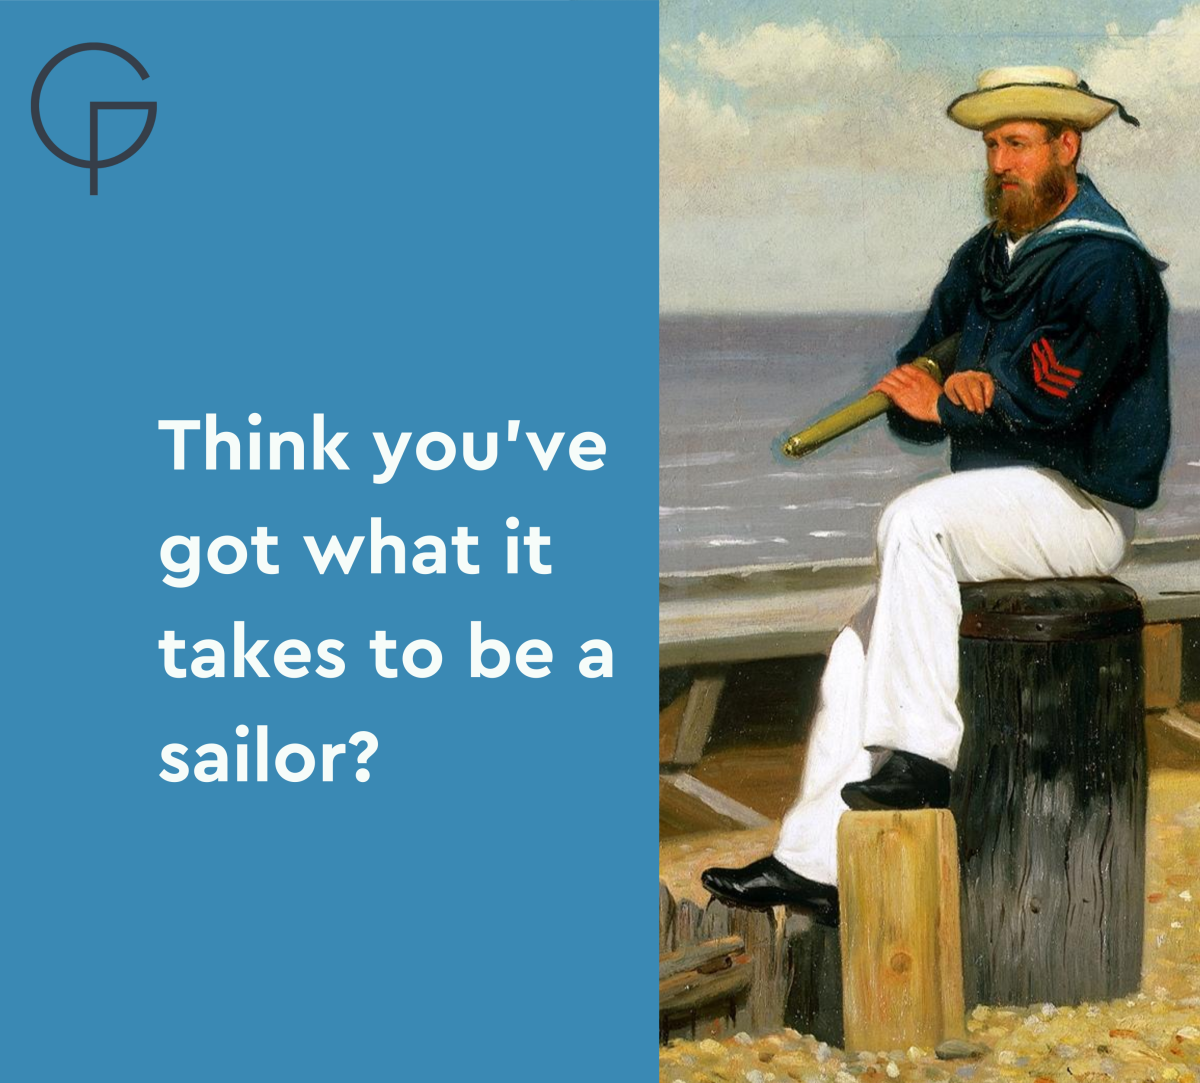 A sailor sits on a log. Next to them them it says Think you've got what it takes to be a sailor?